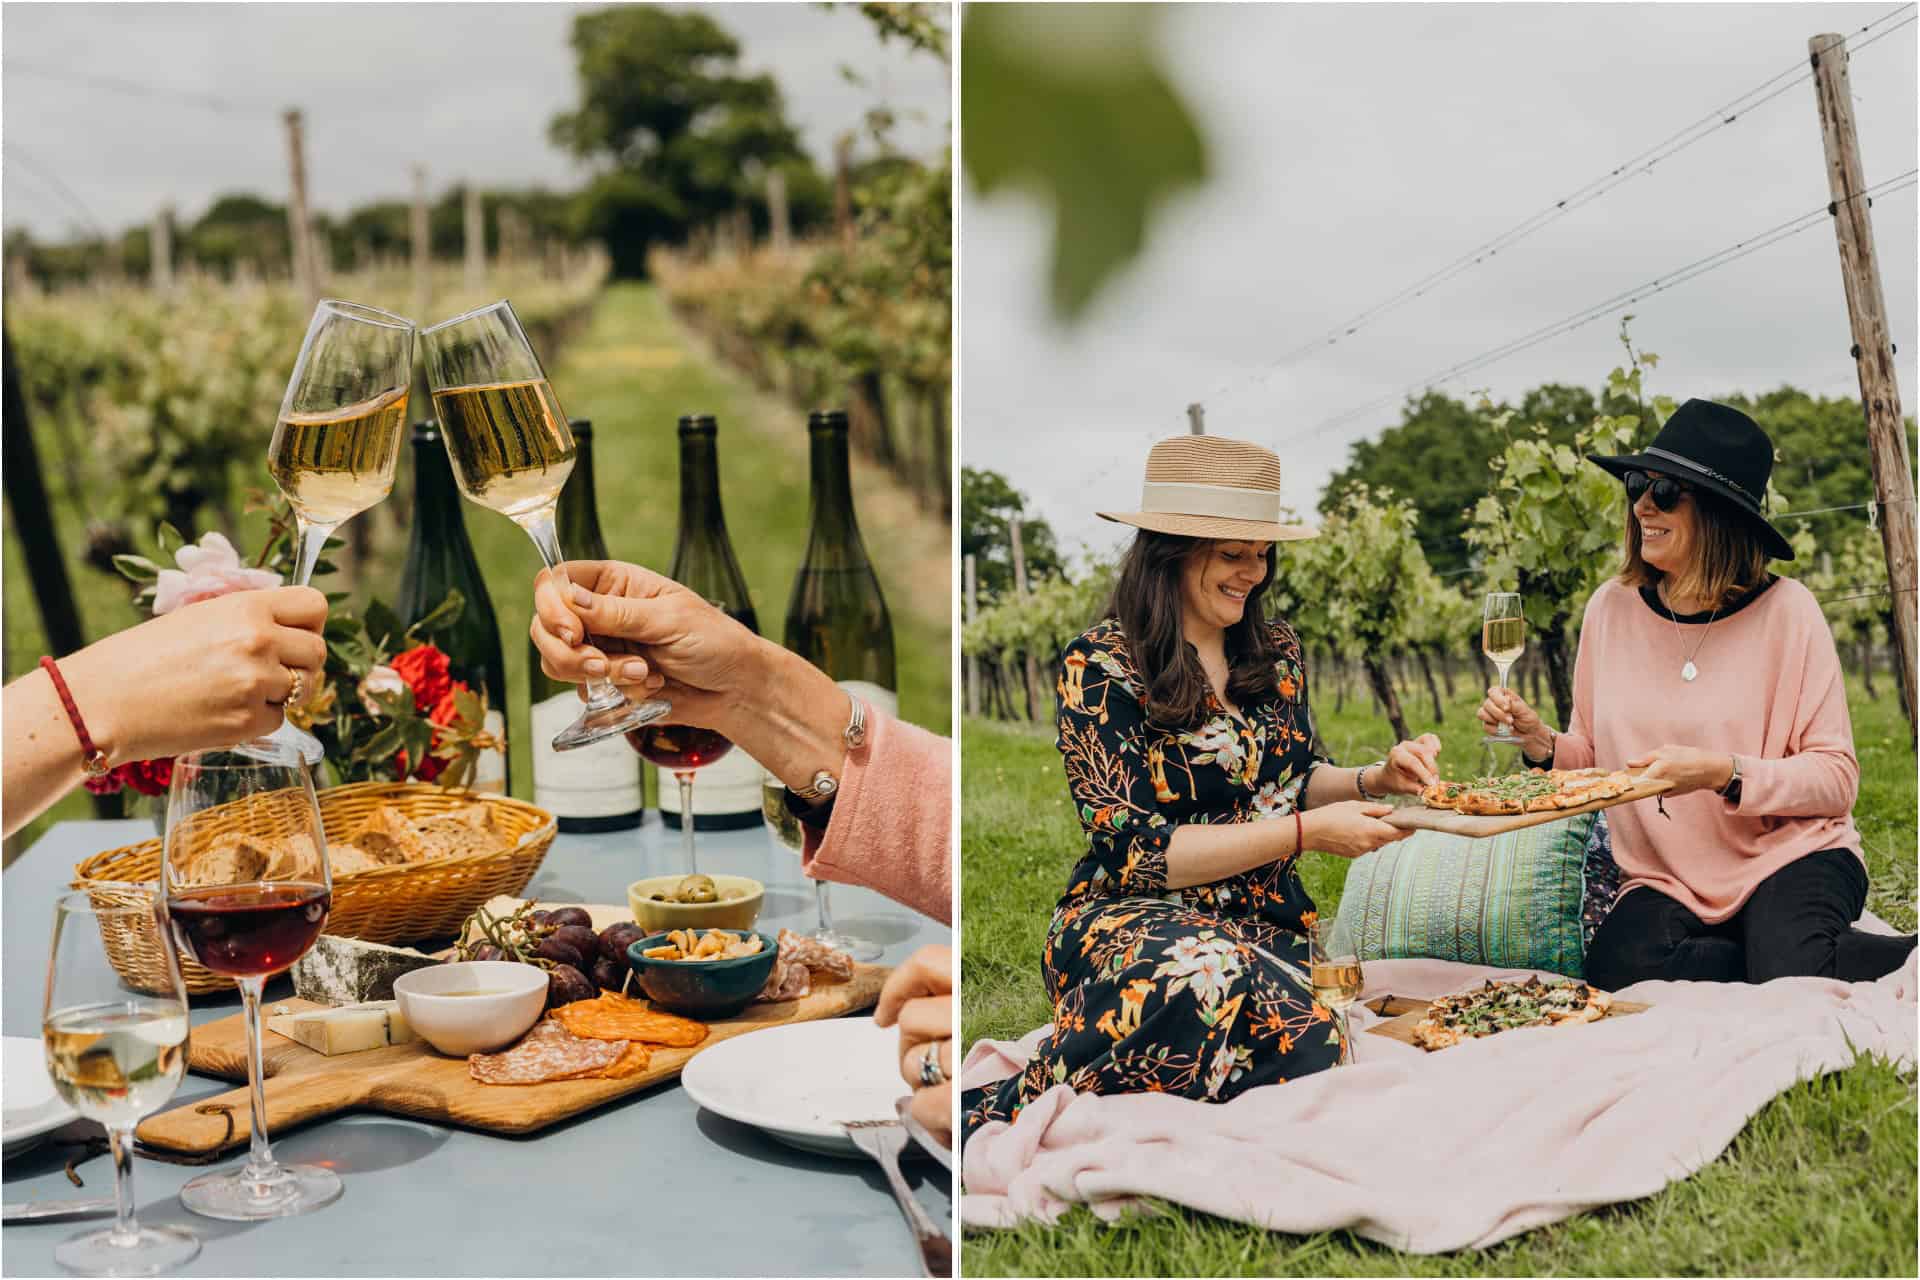 Dine among the vines at Downsview Vineyard